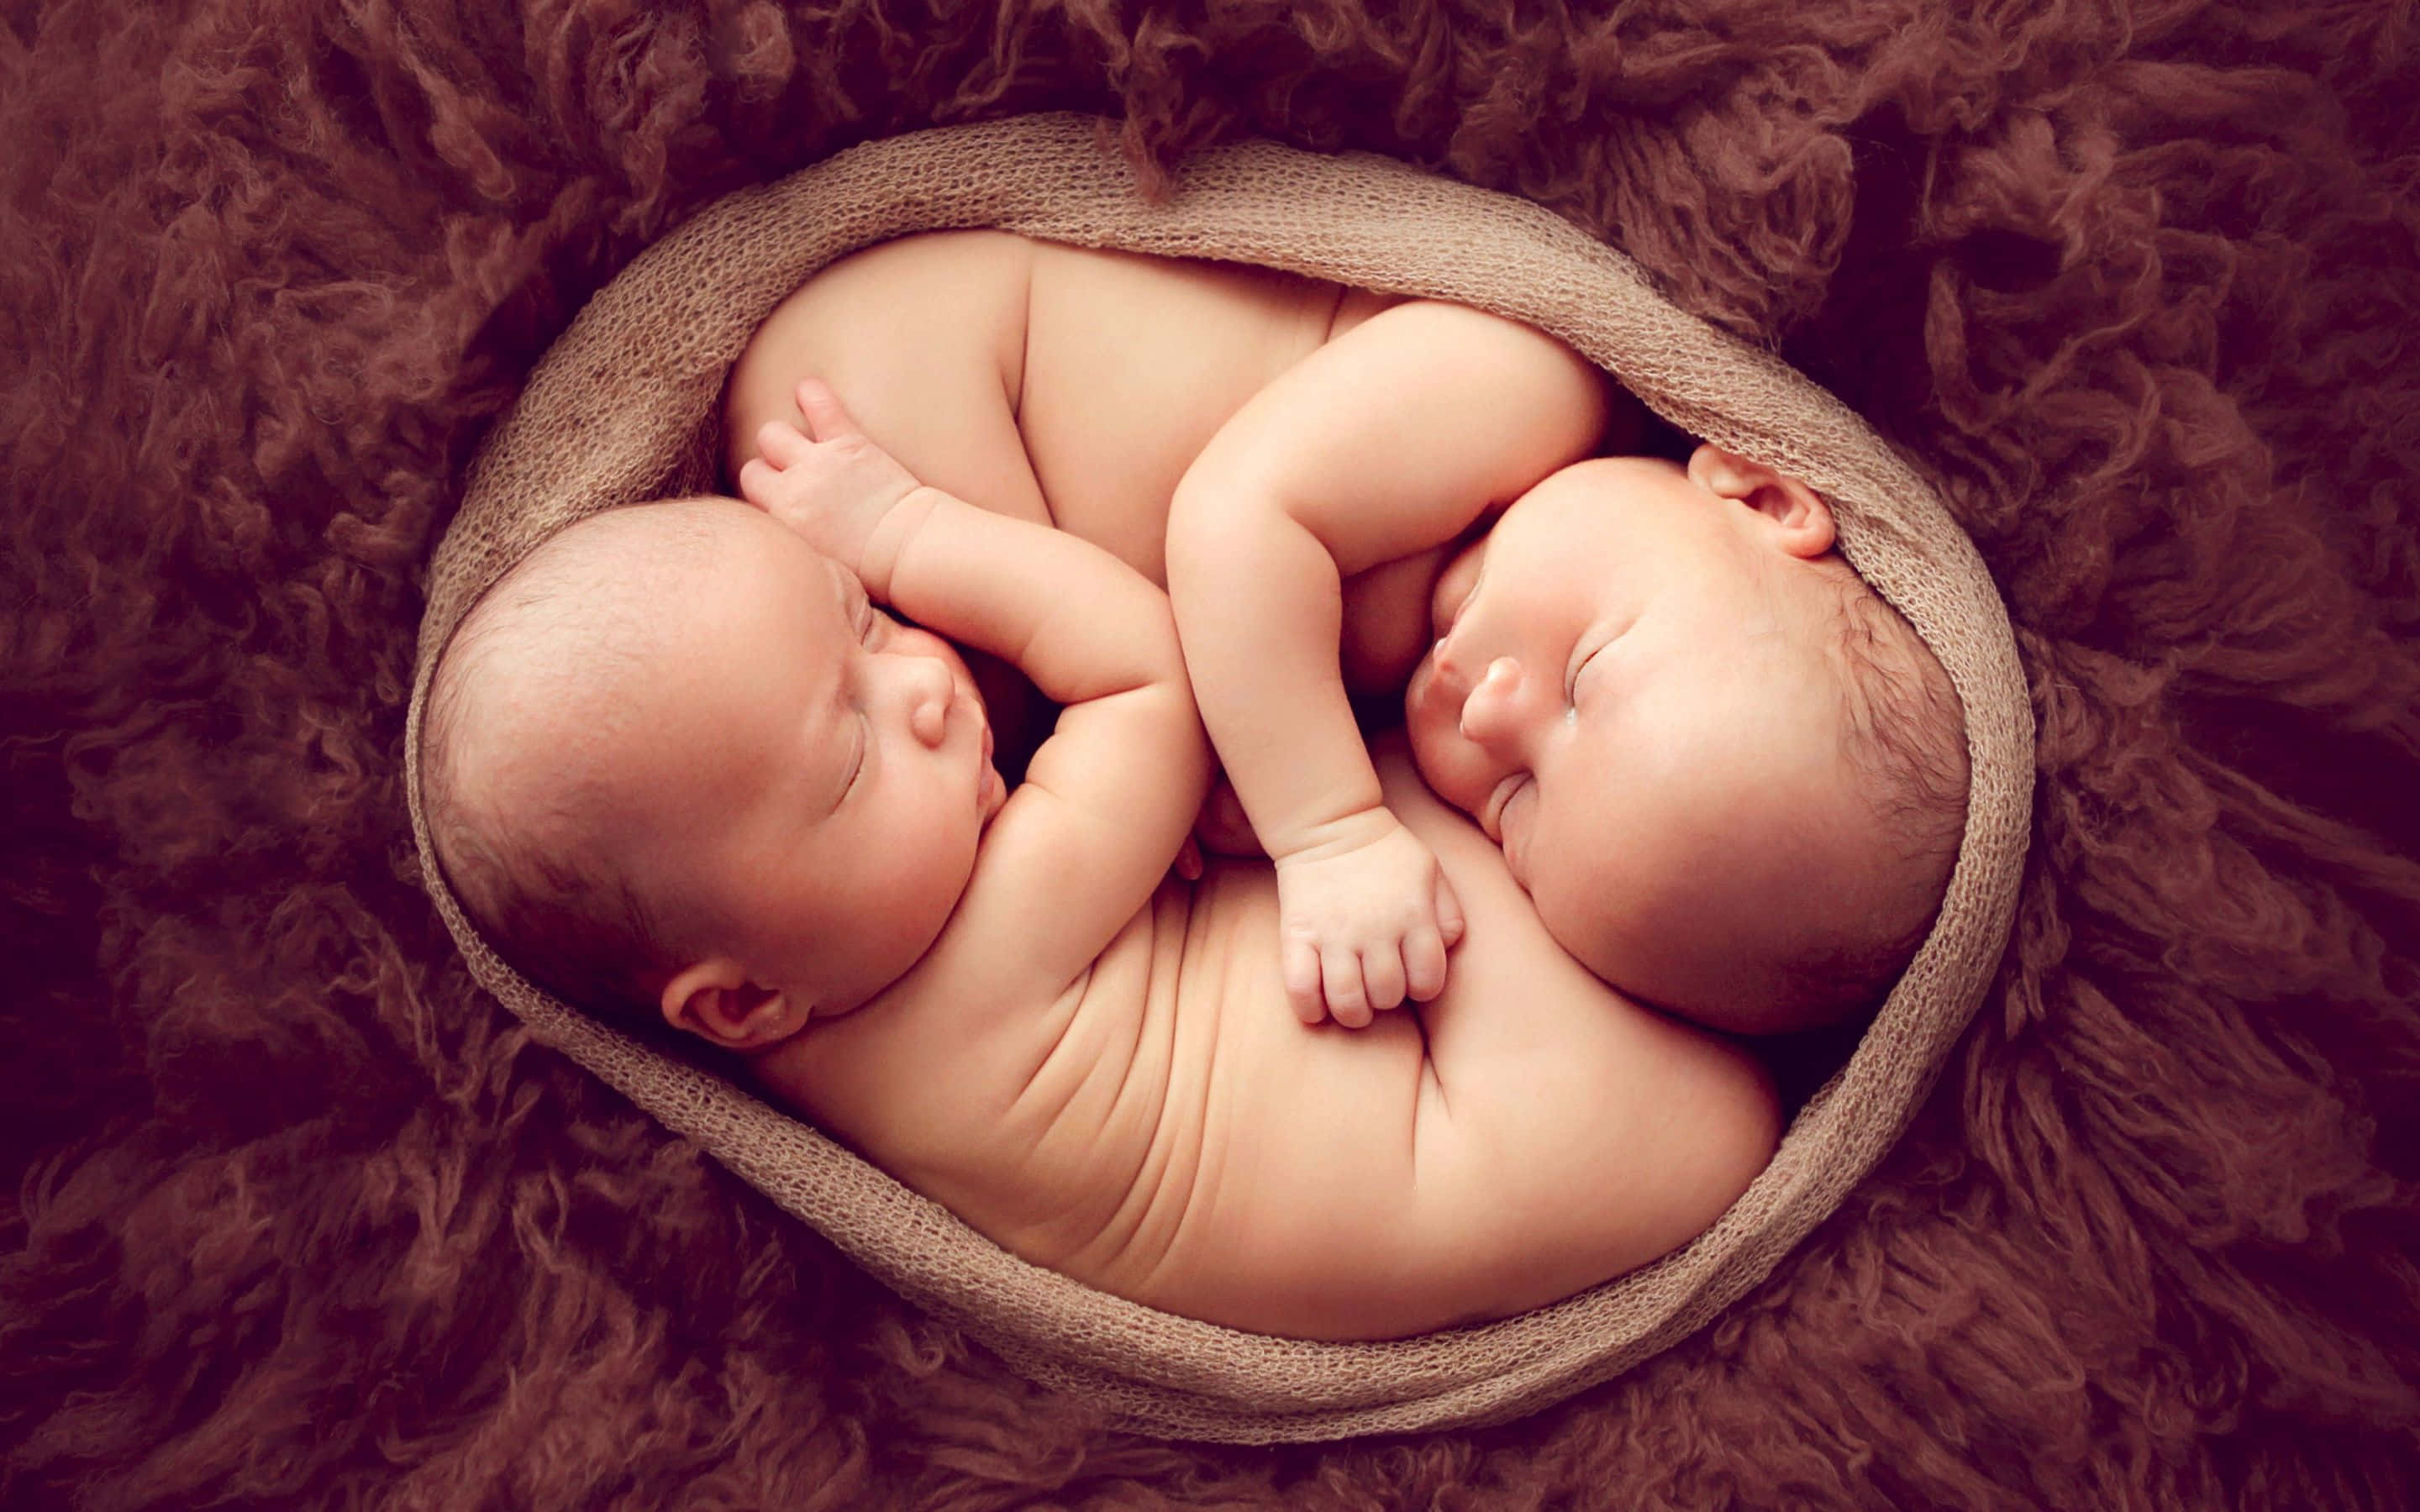 Adorable twin babies sleeping peacefully side by side